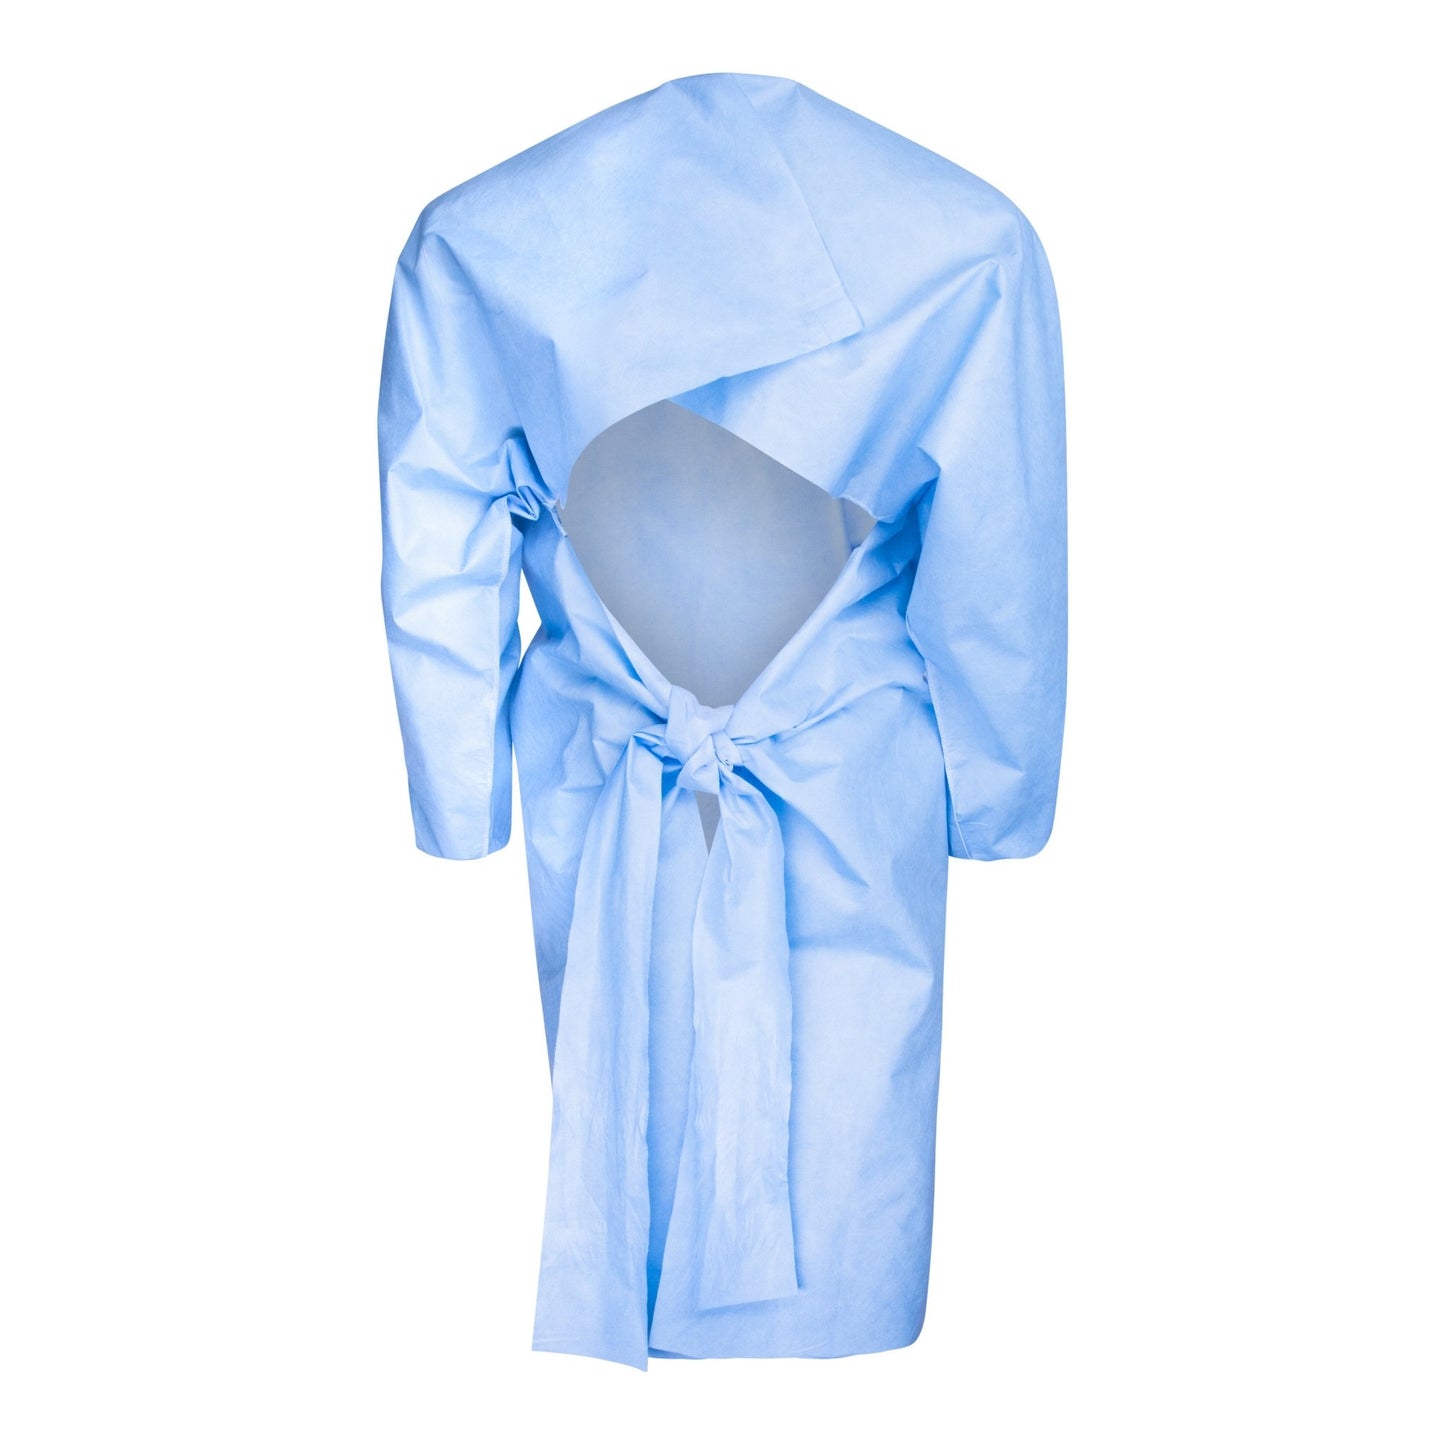 Deluxe Level 2 Isolation Gowns - Disposable - 25 Pack - DisposableGowns.com